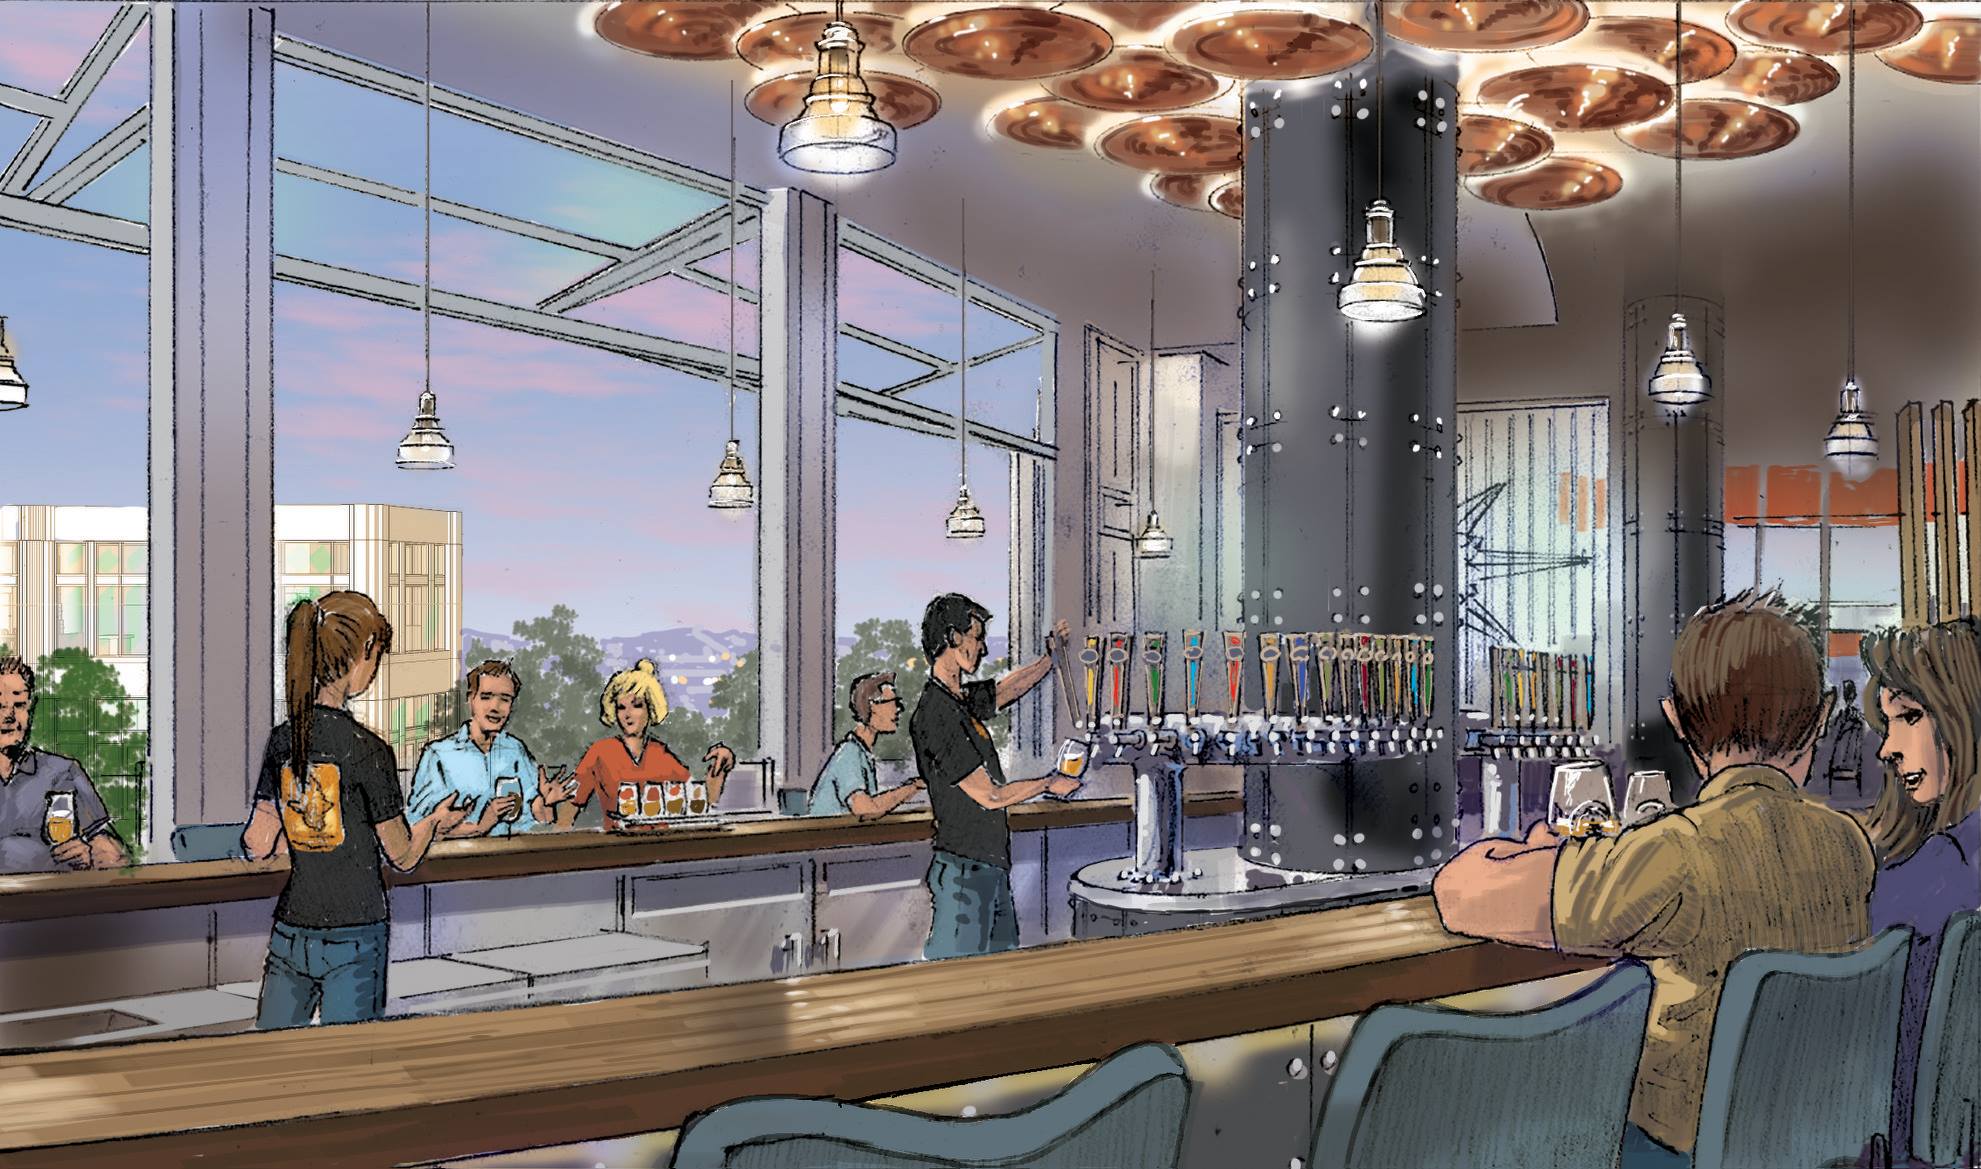 Ballast Point Brewing company downtown Disney drawing